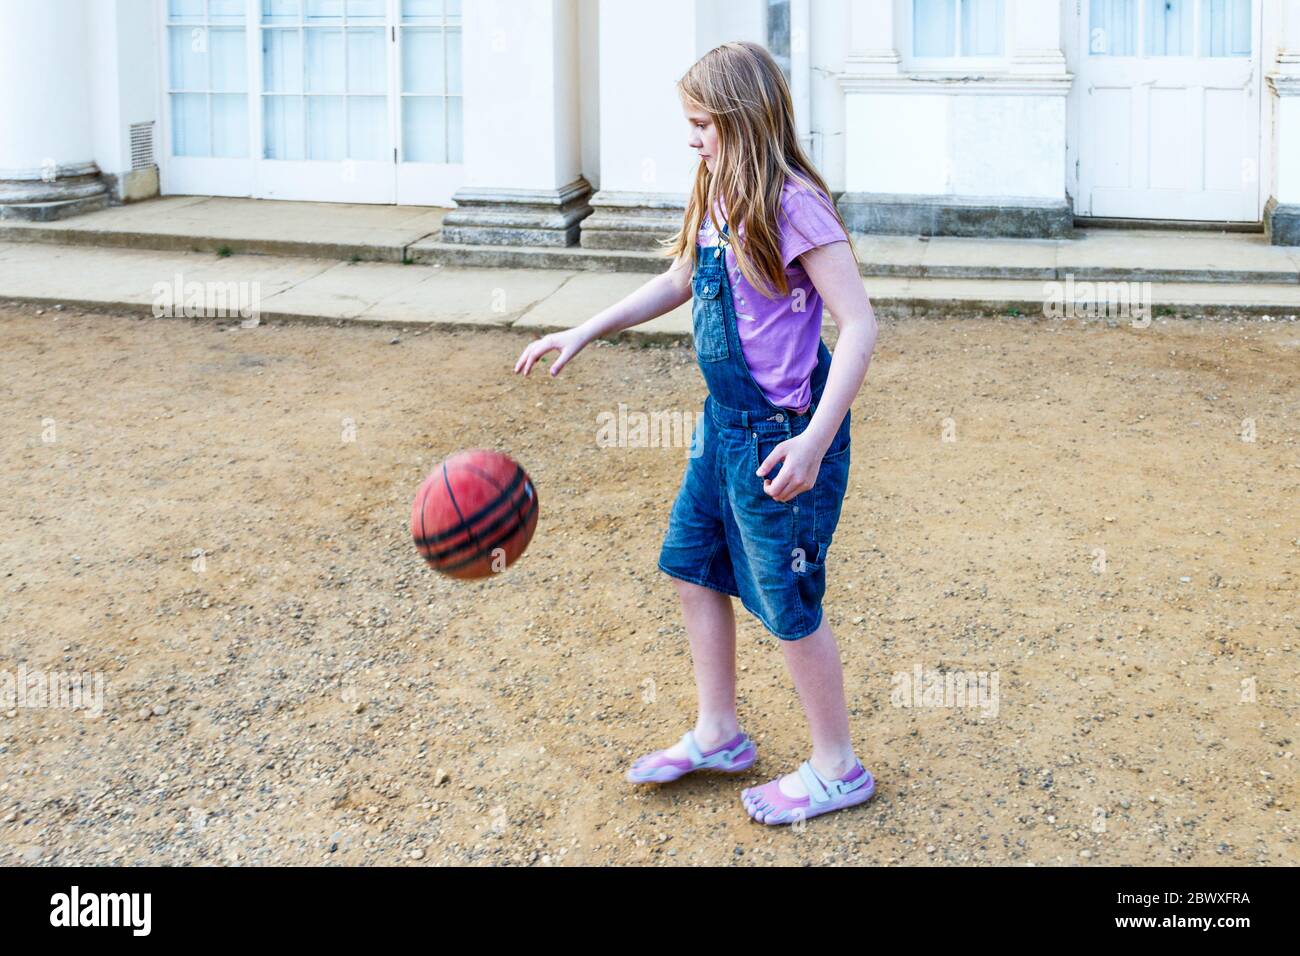 An eleven year-old girl bouncing a basketball in the park, London, UK Stock Photo